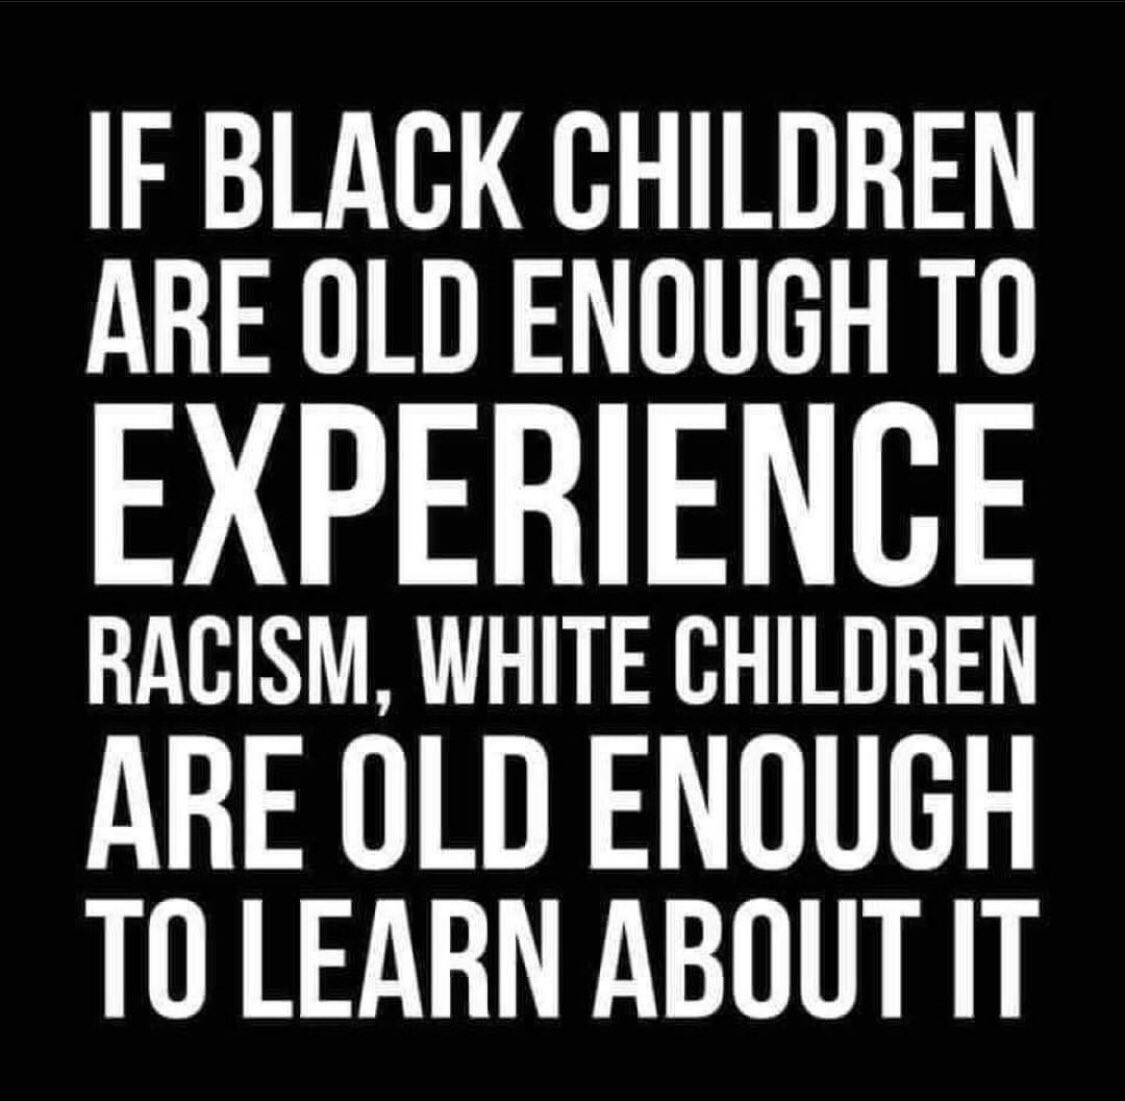 Black Kids receive “the talk” from their parents. Keep your hands on the wheel. Don’t reach into the dash without permission. Don’t look the cop in the eye. Be polite.

And, yet they still face police brutality because of the color of their skin.

Racism is learned. The only way…